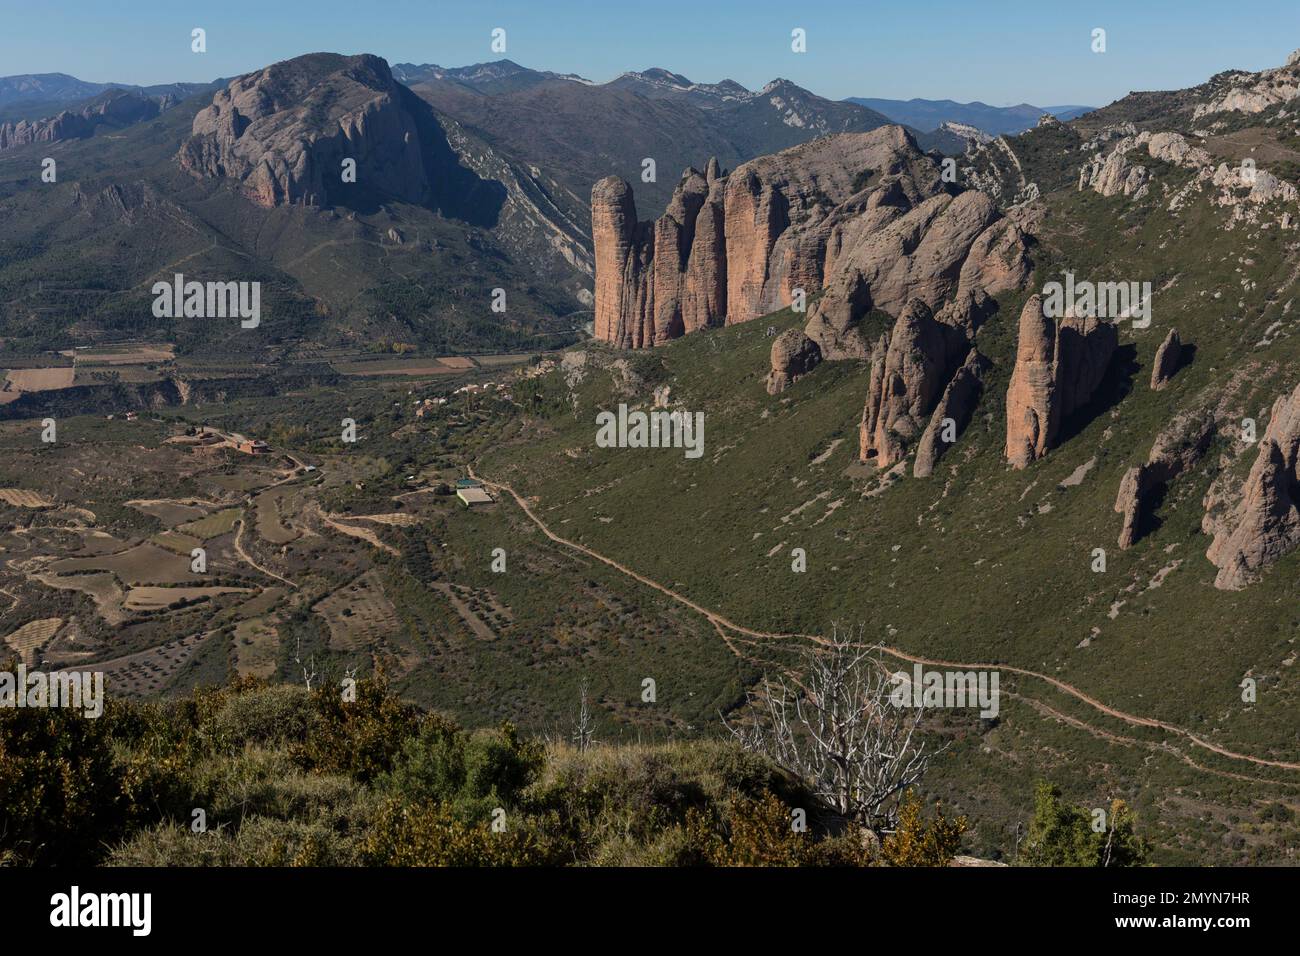 Los Mallos de Riglos, conglomerate rocks, height of the rocks 300m, paradise for climbers, province of Huesca, Aragon, southern edge of the Pyrenees, Stock Photo